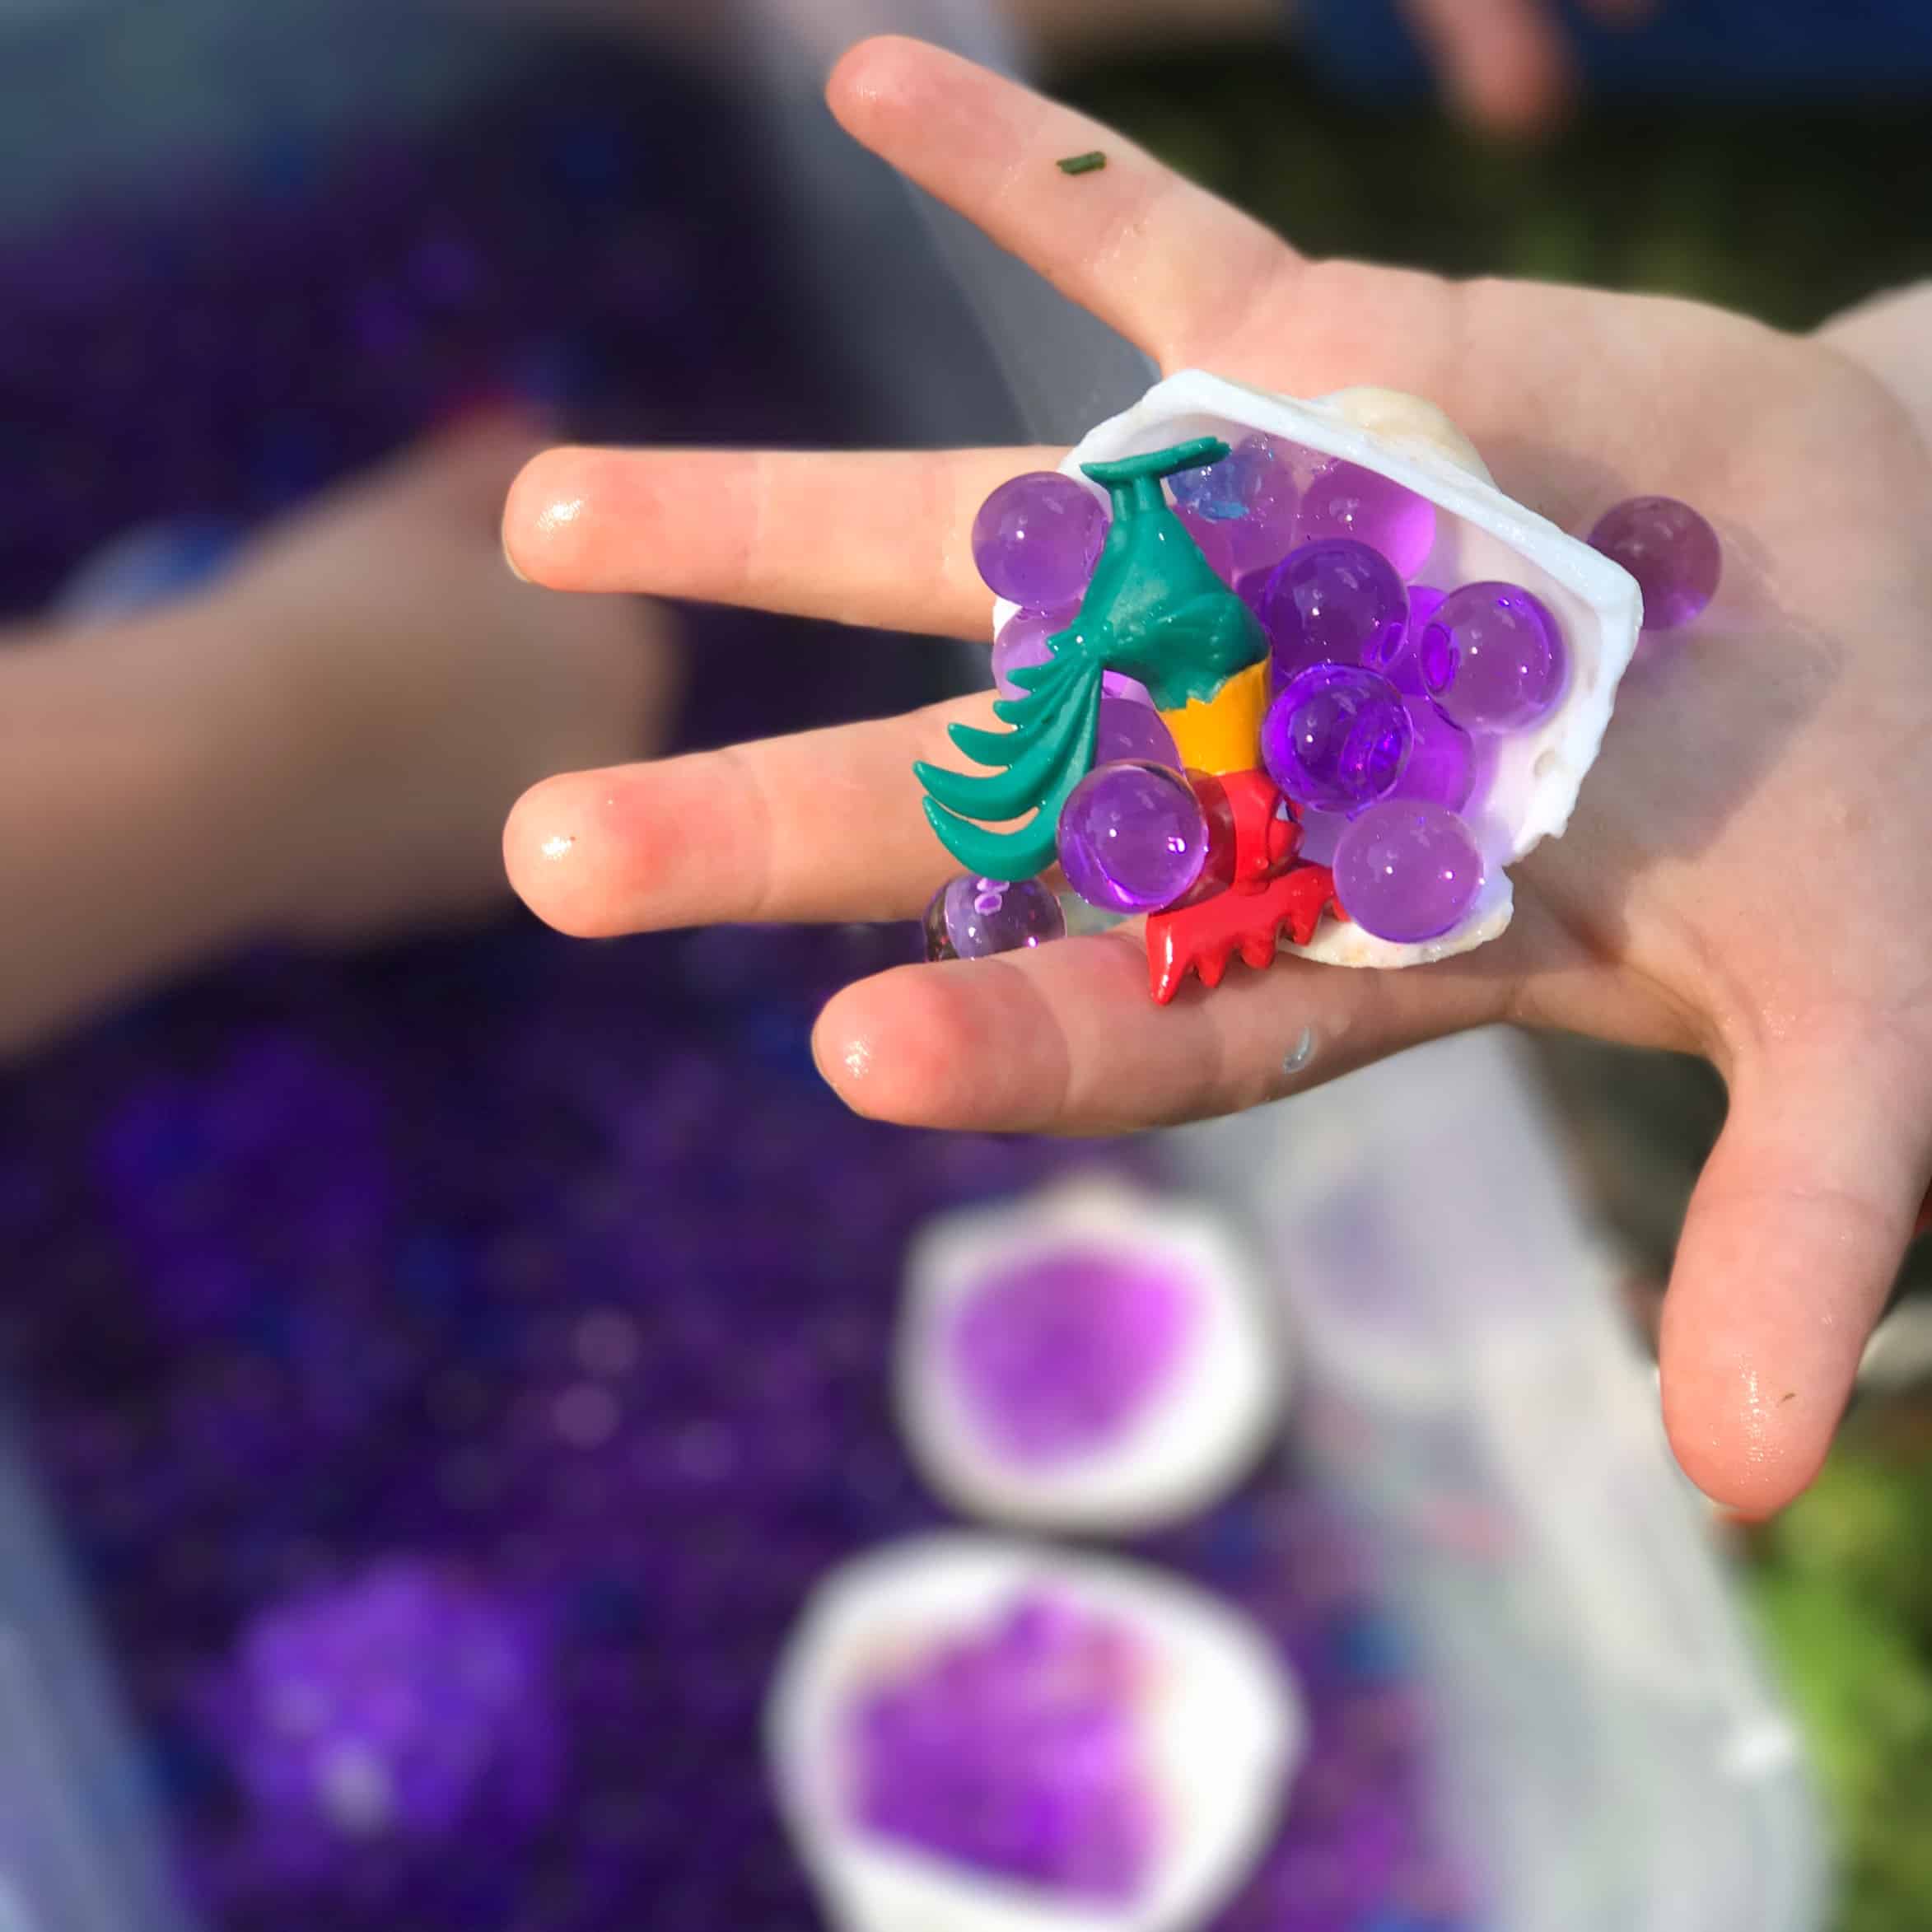 This water bead sensory play is a fun way to use our Moana toys for some pretend play. Water beads are inexpensive to purchase and tons of fun for kids to play with!